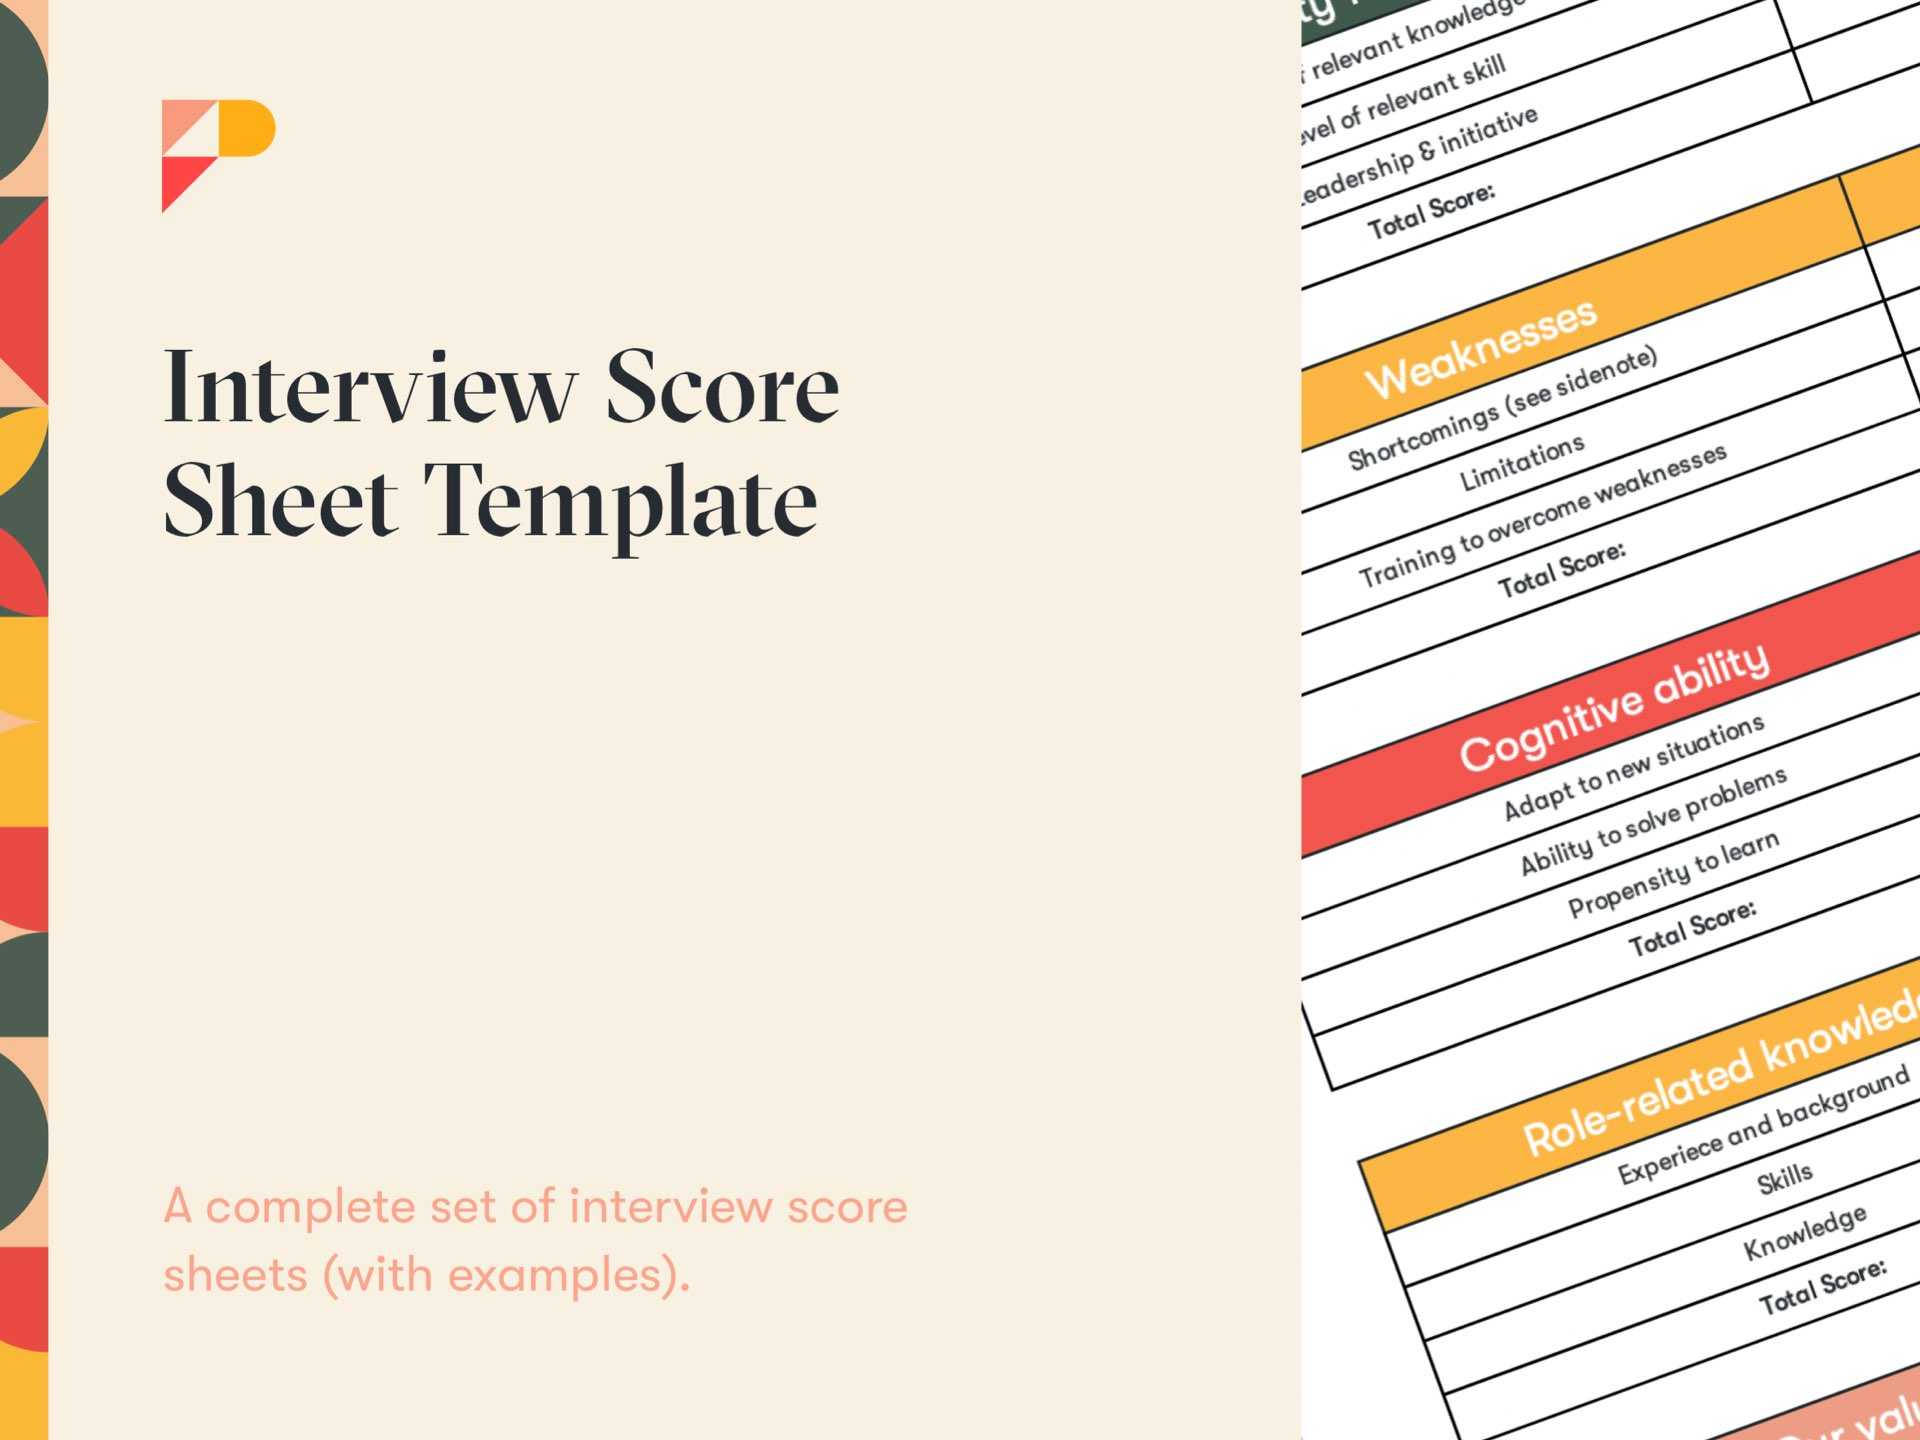 Interview Score Sheet Template (With Examples) Free Download